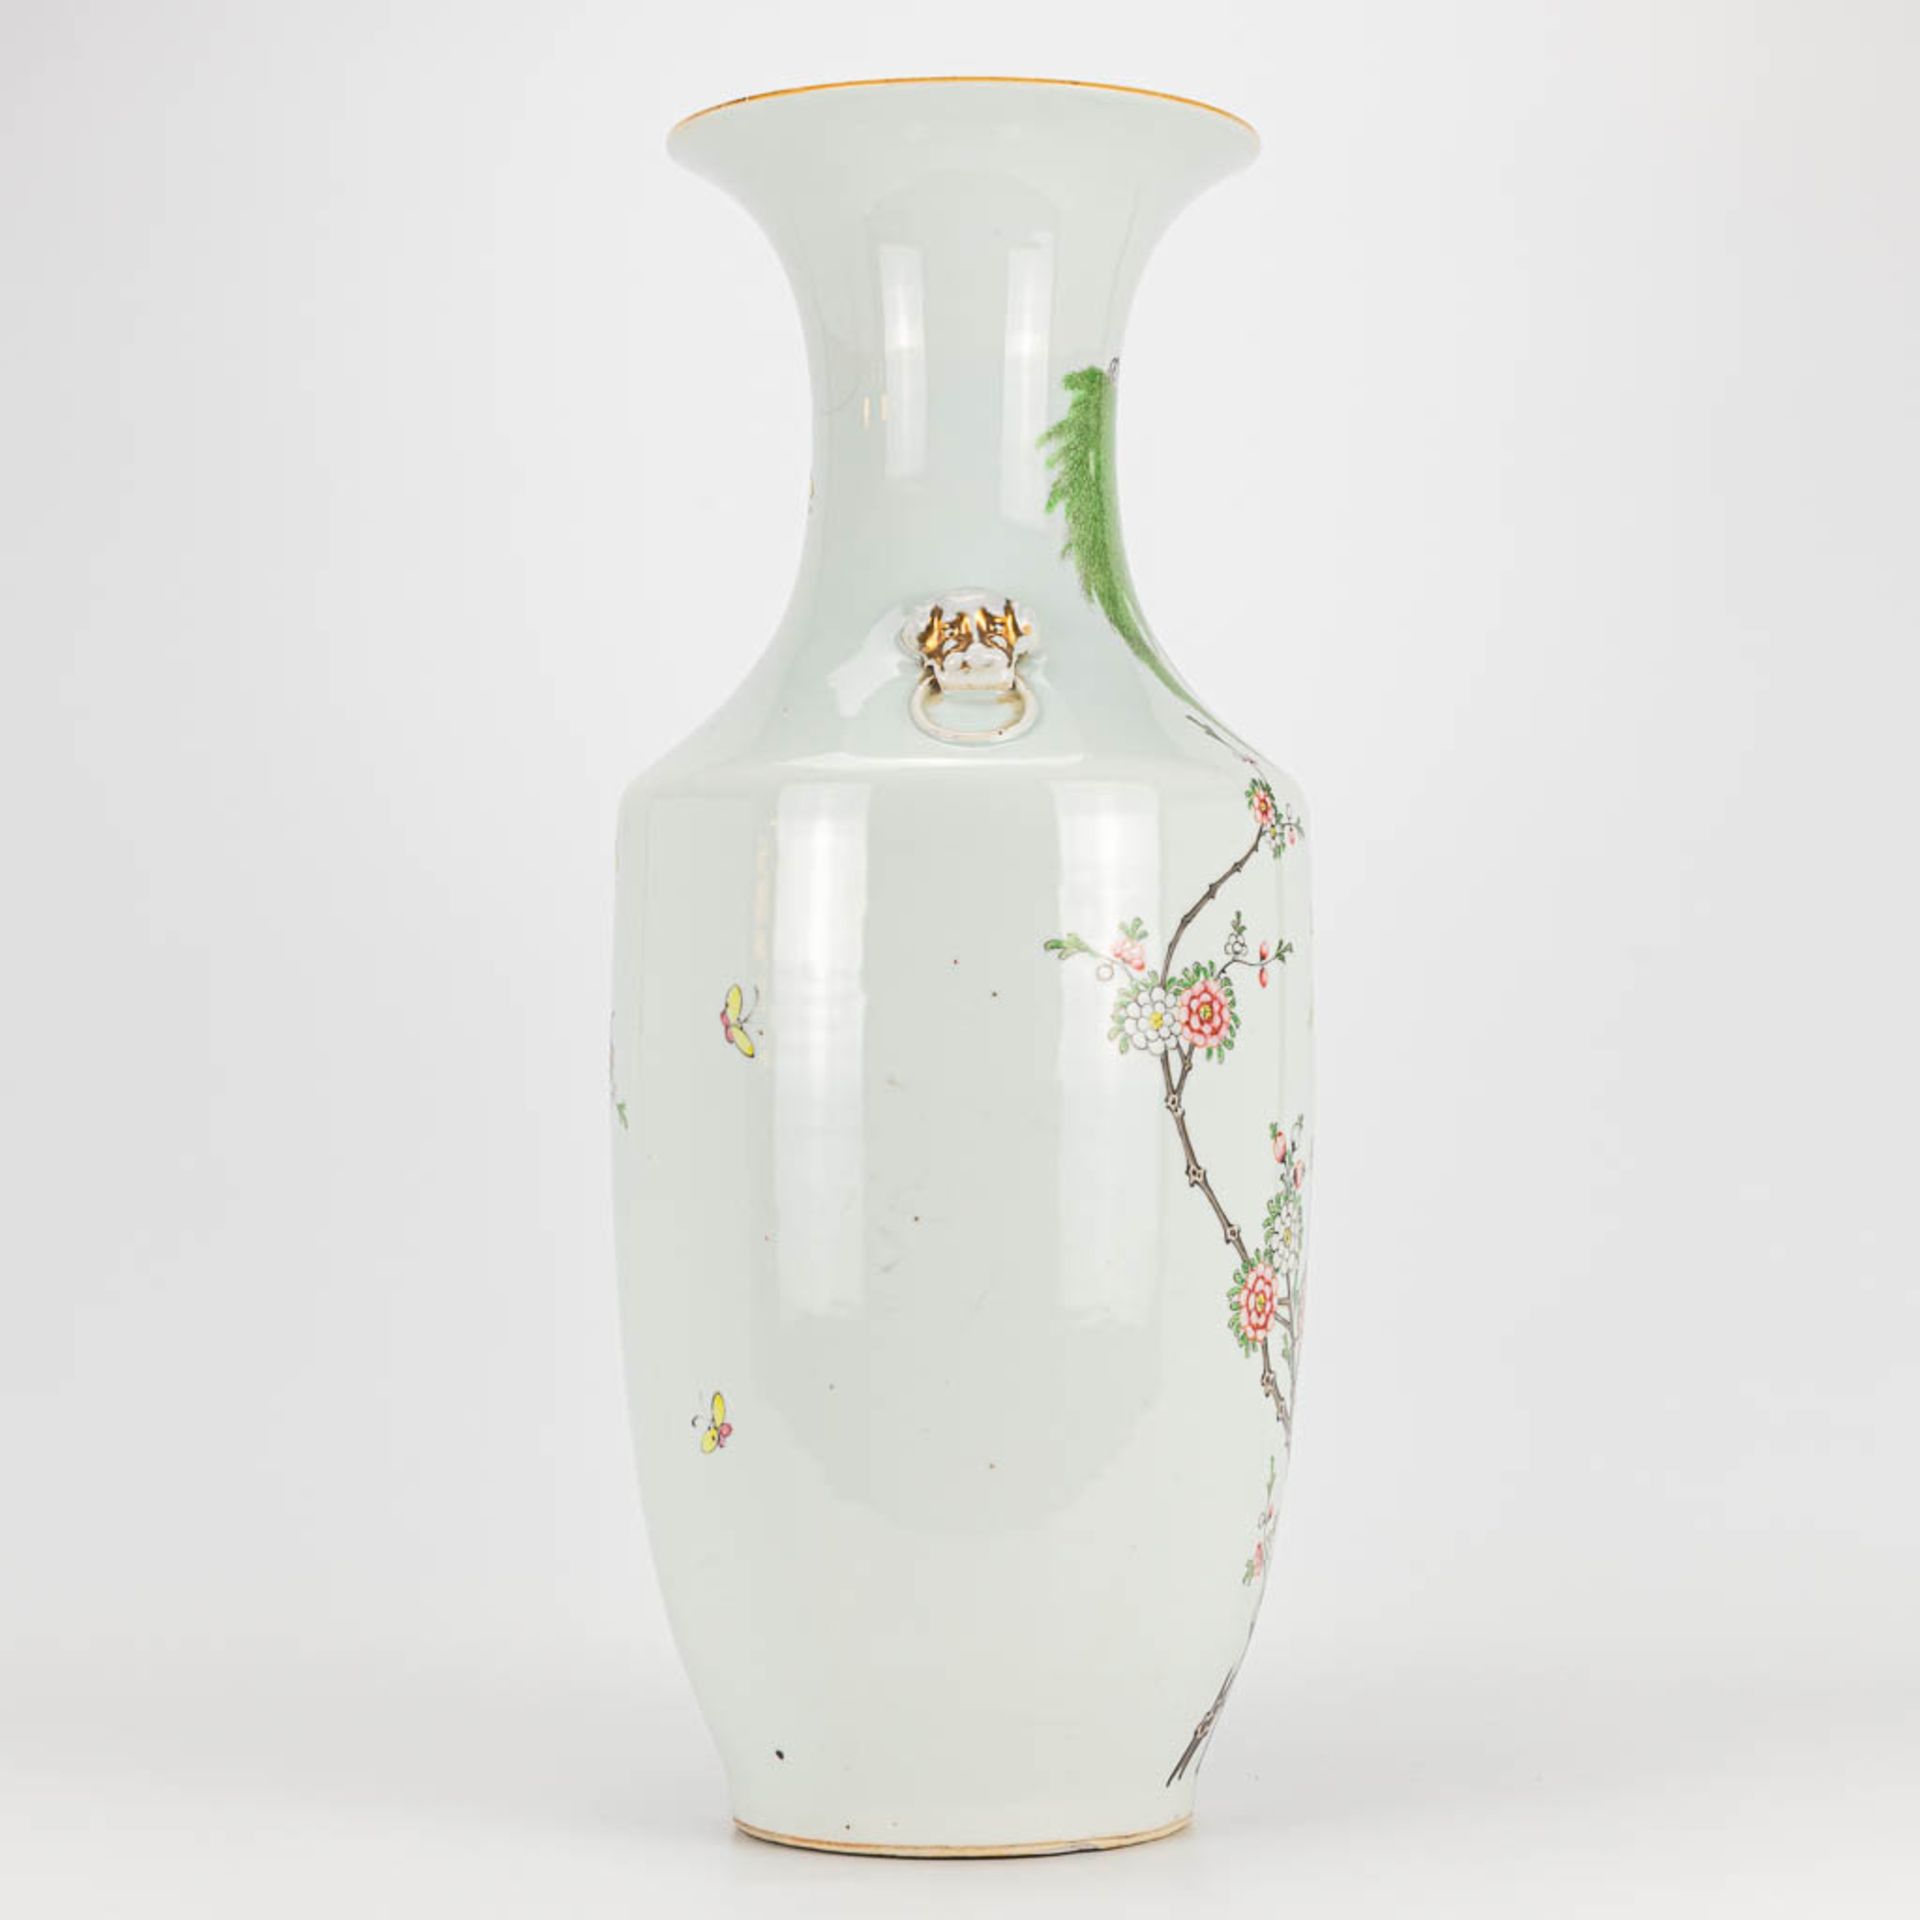 A vase made of Chinese porcelain and decorated with flowers and birds. - Image 4 of 16